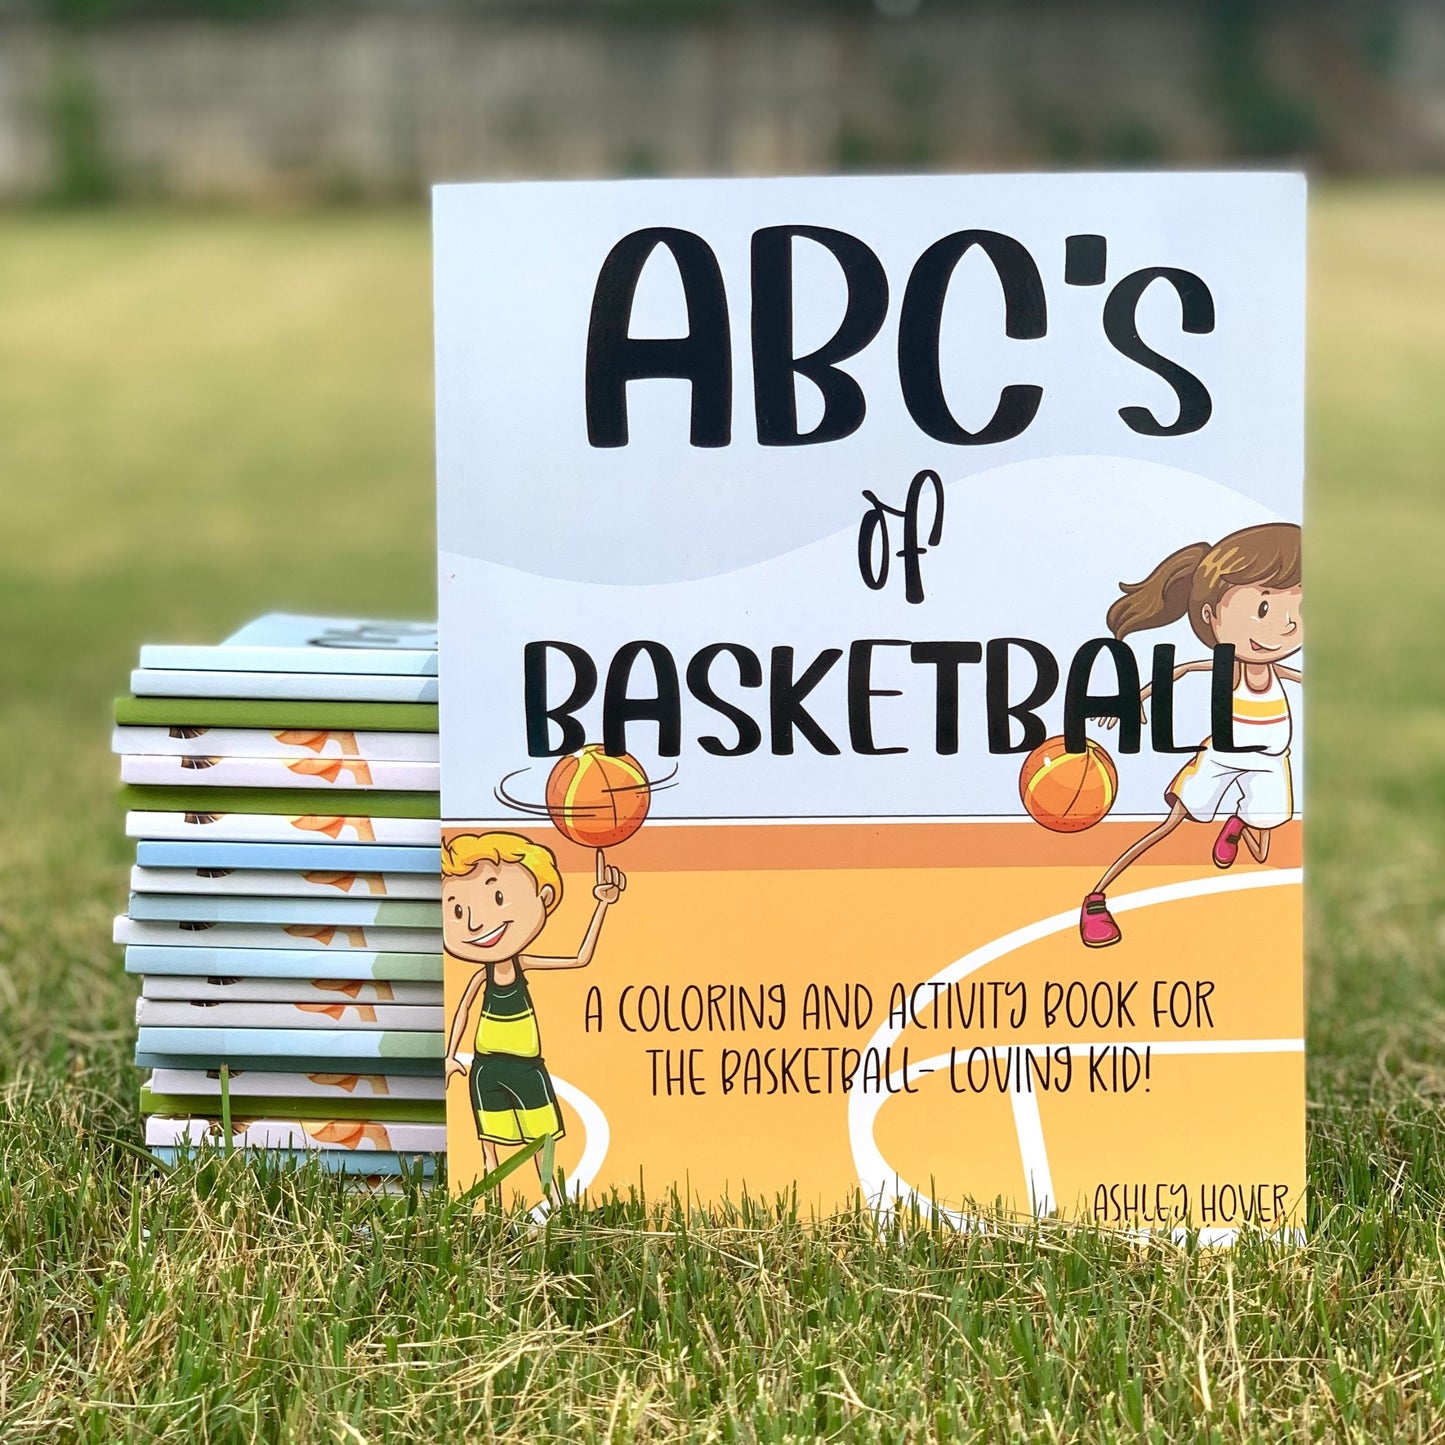 ABC's of Basketball: A Coloring and Activity Book for the Basketball-Loving Kid